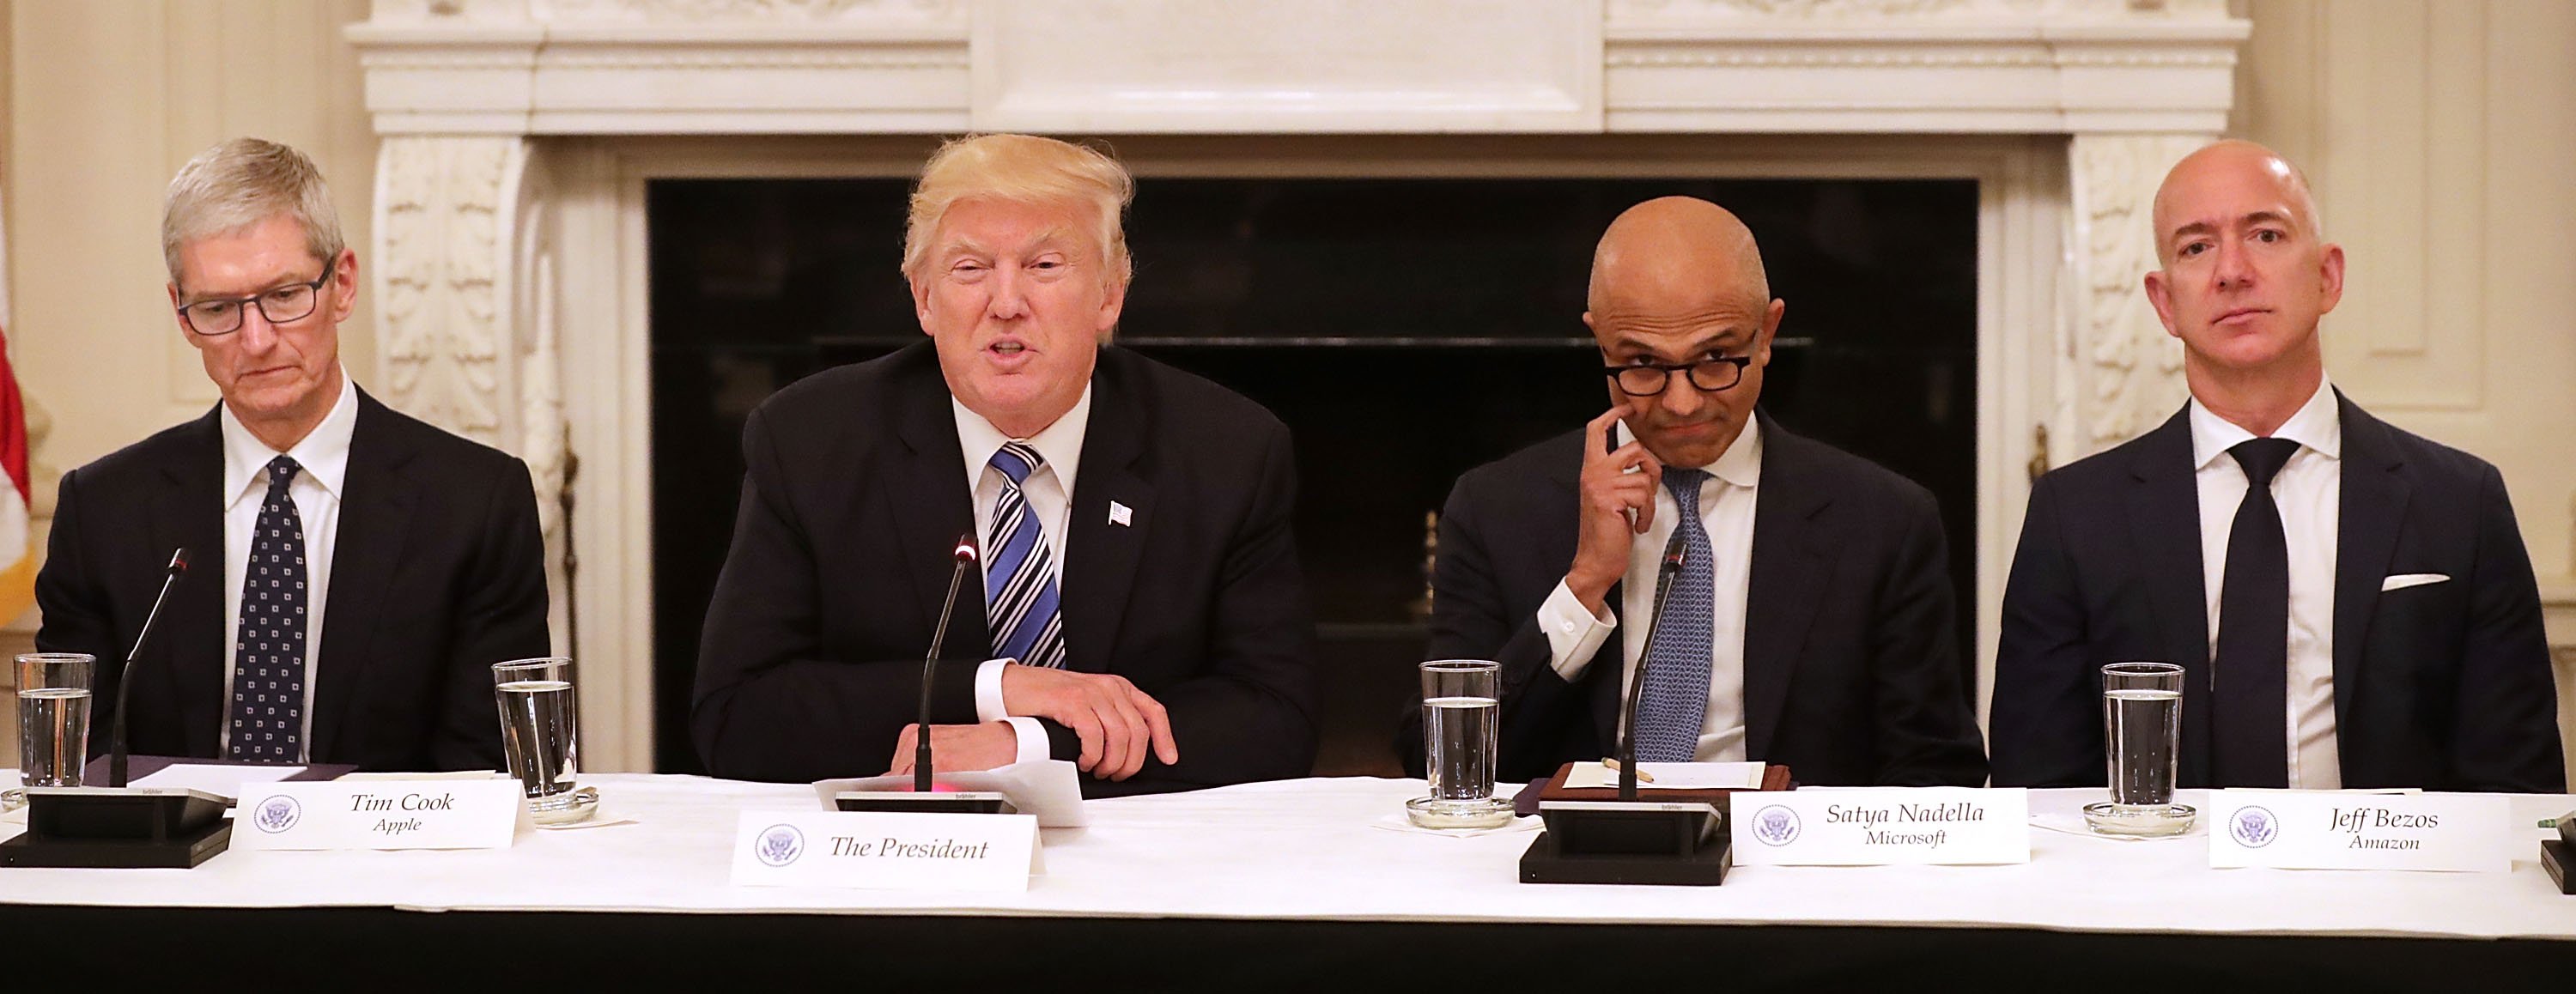 WASHINGTON, DC - JUNE 19: U.S. President Donald Trump (2nd L) welcomes members of his American Technology Council, including (L-R) Apple CEO Tim Cook, Microsoft CEO Satya Nadella and Amazon CEO Jeff Bezos in the State Dining Room of the White House June 19, 2017 in Washington, DC. According to the White House, the council's goal is "to explore how to transform and modernize government information technology." (Photo by Chip Somodevilla/Getty Images)